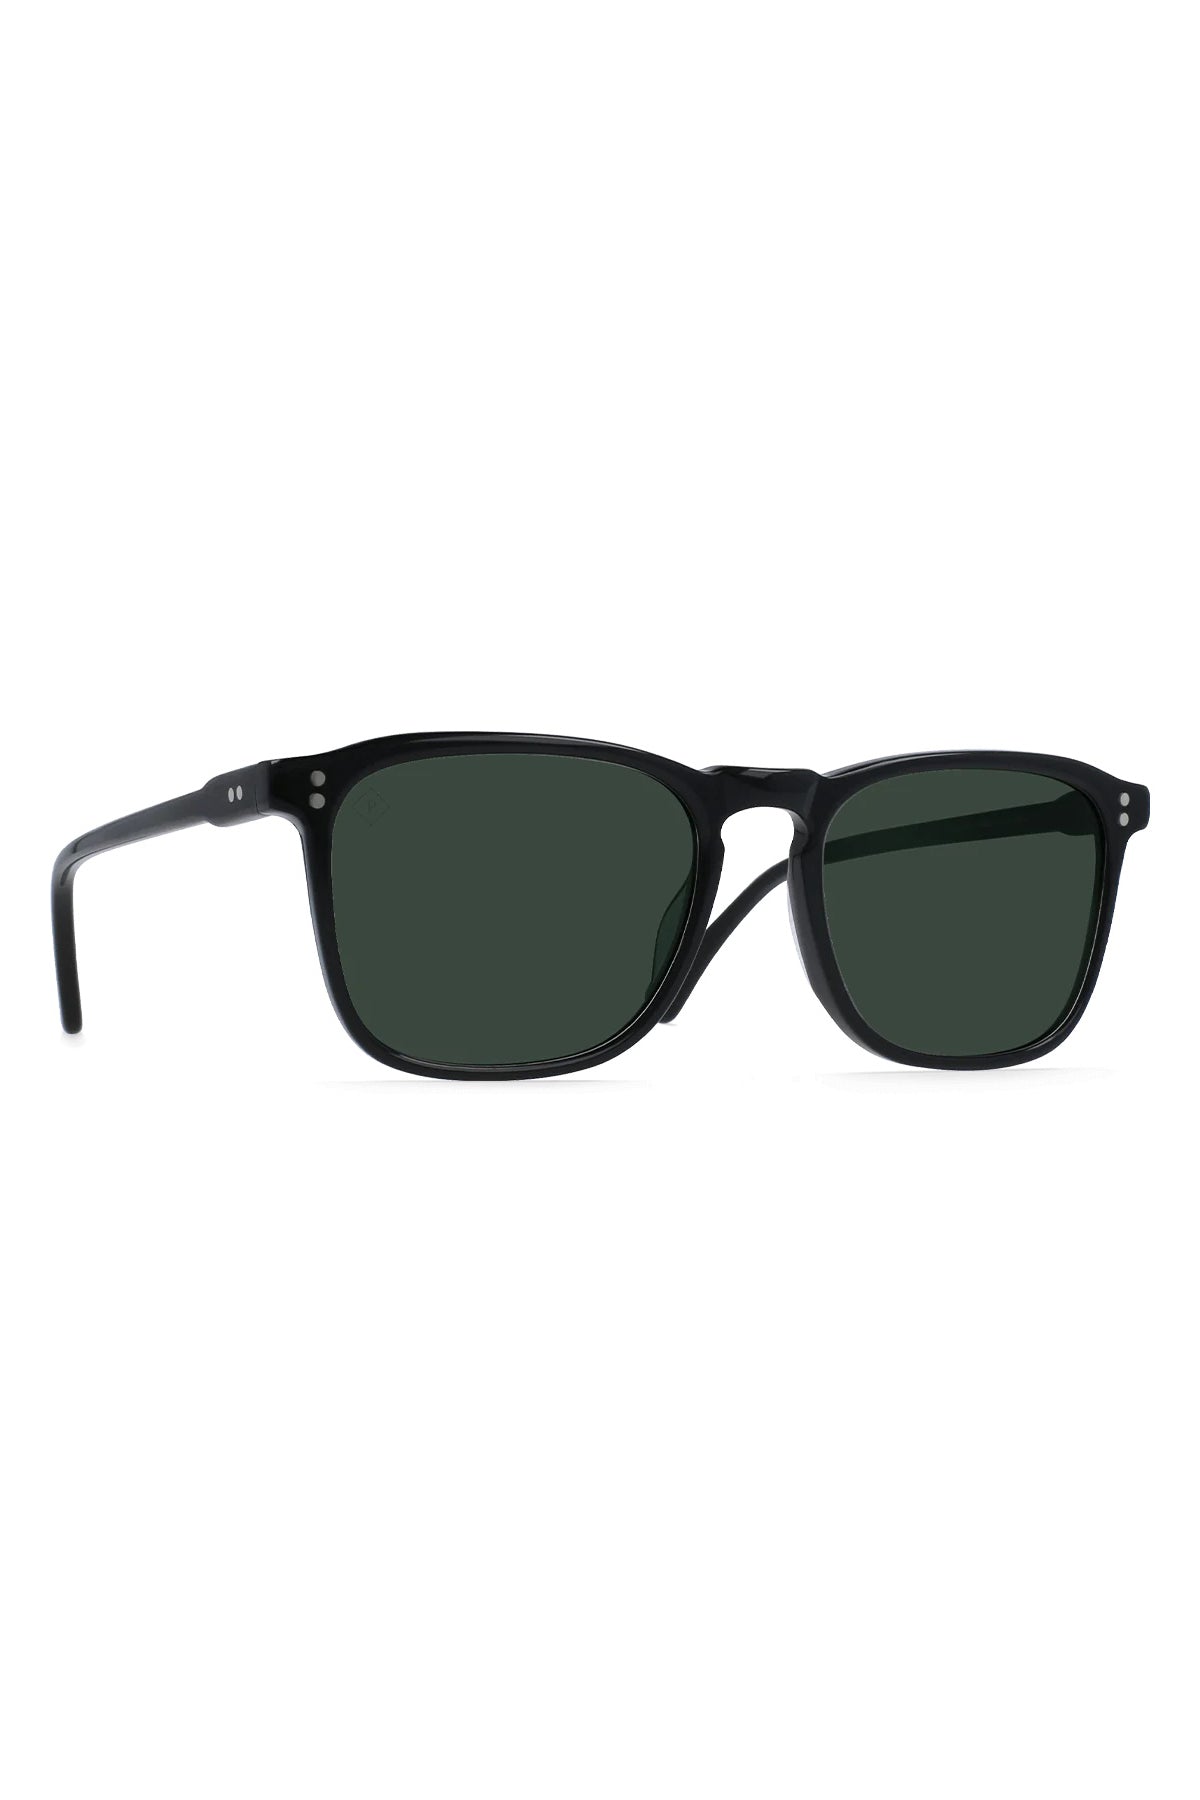 WILEY - RECYCLED BLACK/GREEN POLAR